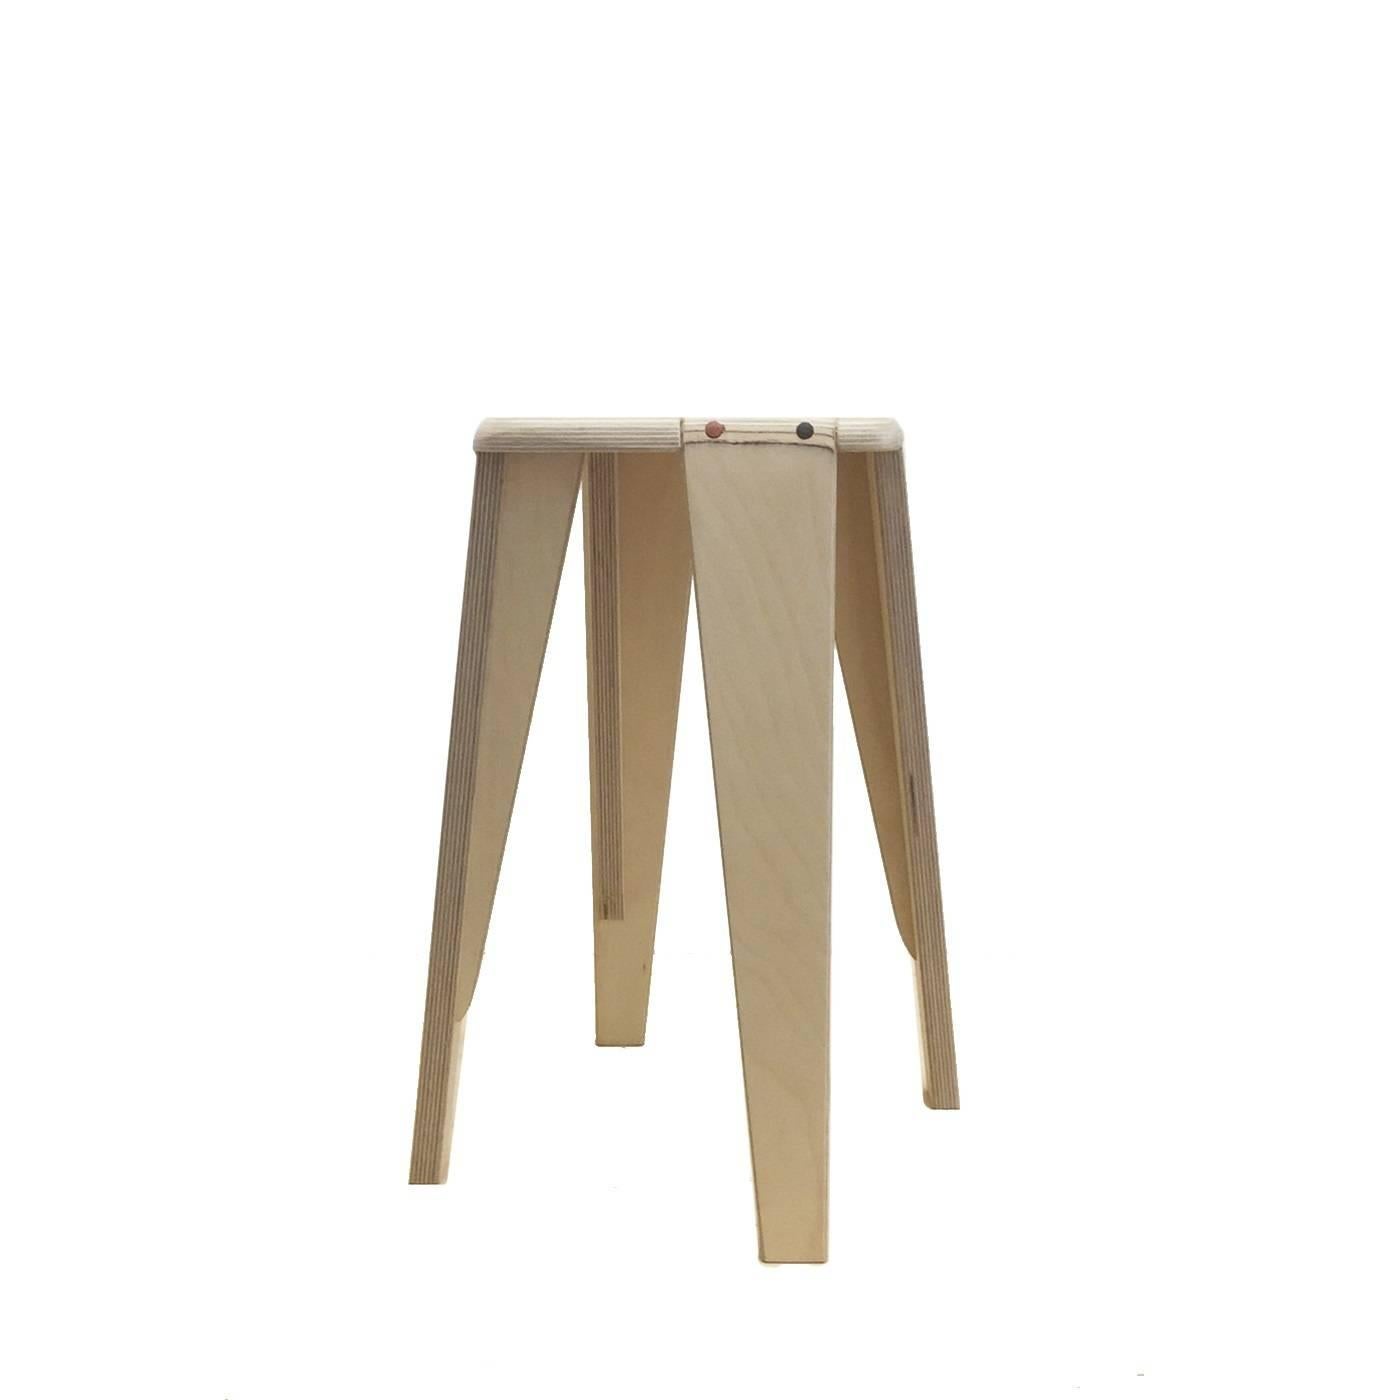 This versatile stool is part of the LW collection and can be used as side table or planter and, either alone or paired with other pieces from the same series, it will bring a touch of subtle elegance to a modern decor. Its four legs are attached to